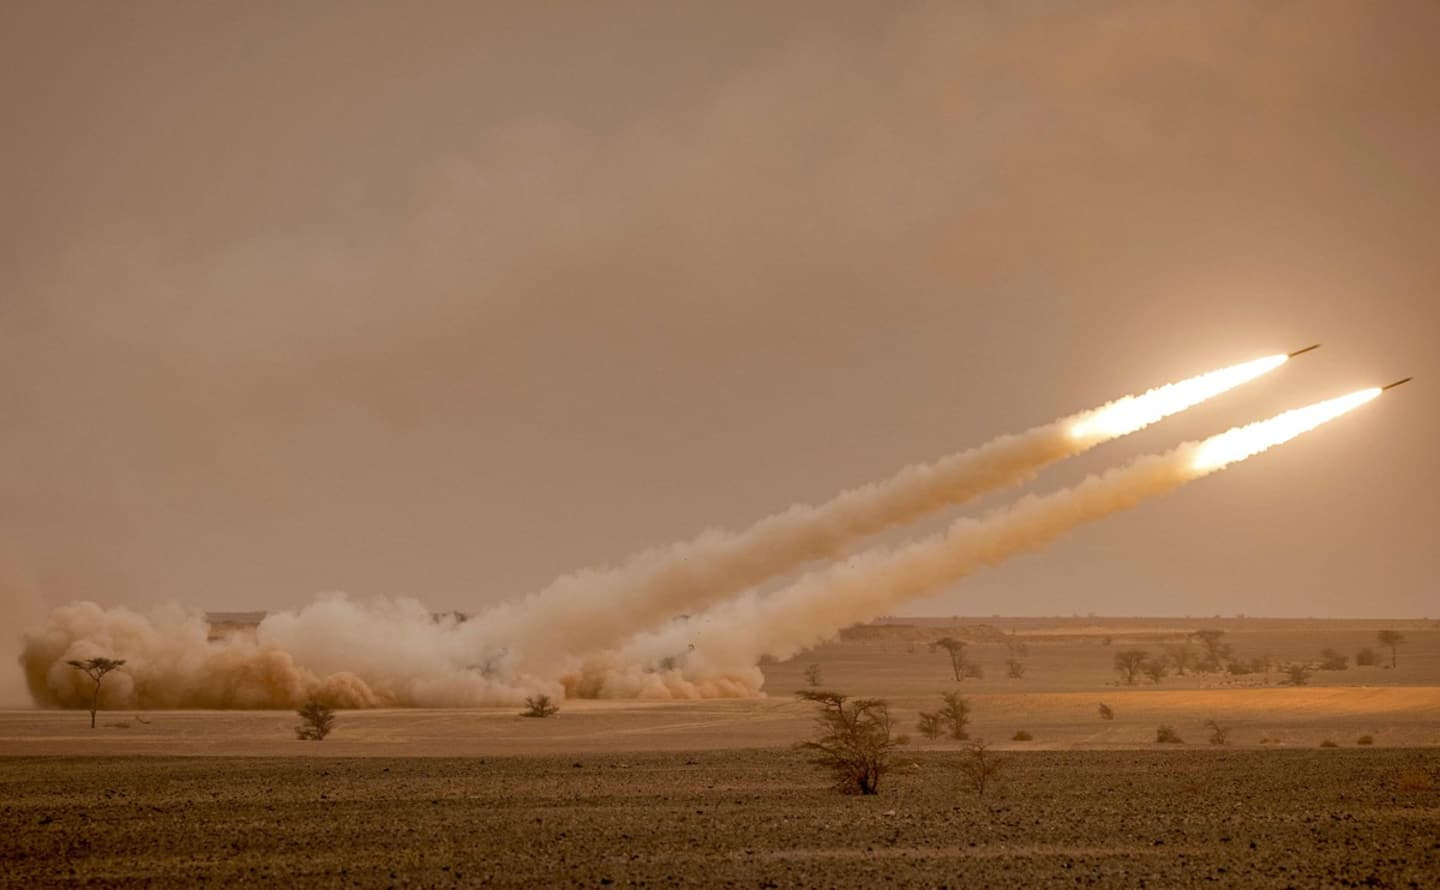 Will the American multiple rocket launchers announced in Ukraine be a game-changer?